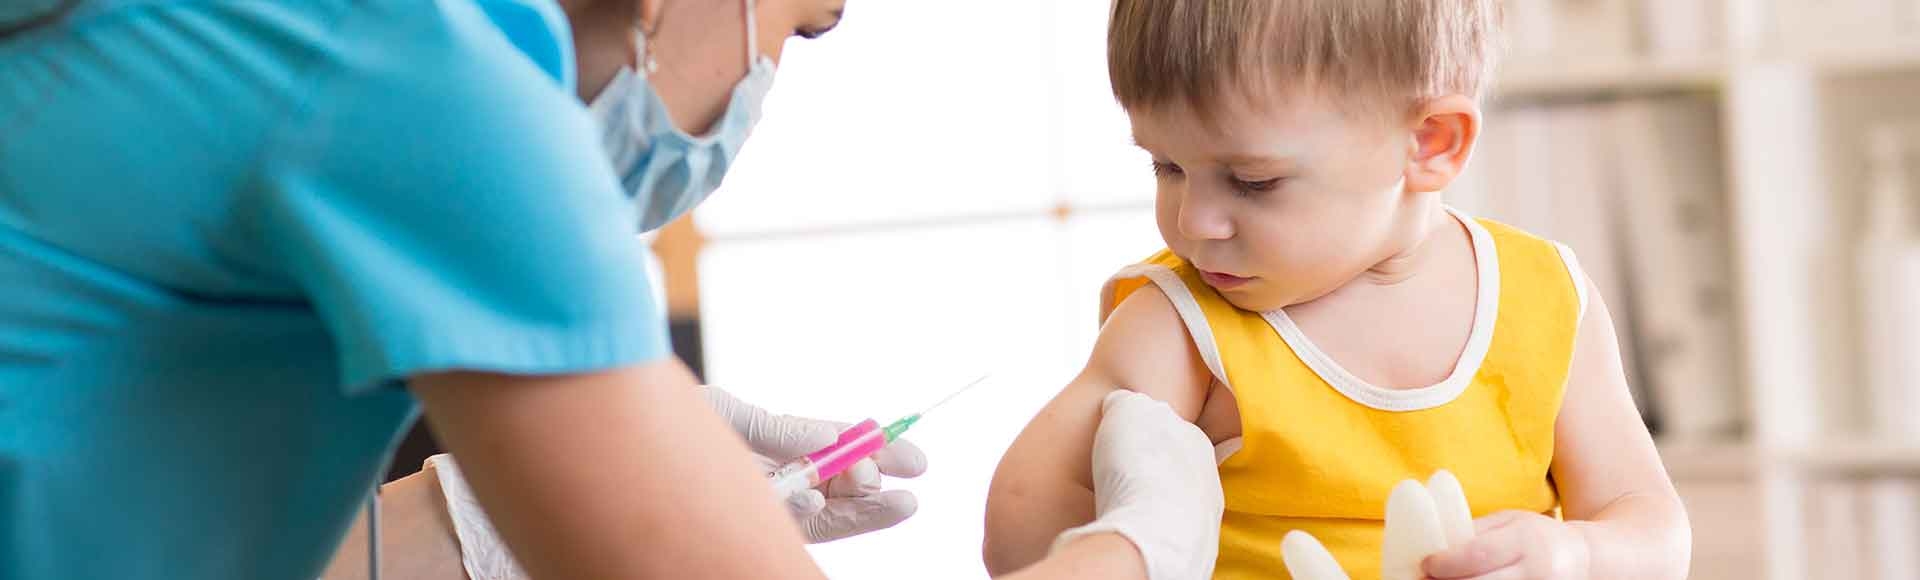 Vaccines In Children: 5 Steps To Take If You Suspect Adverse Reactions 